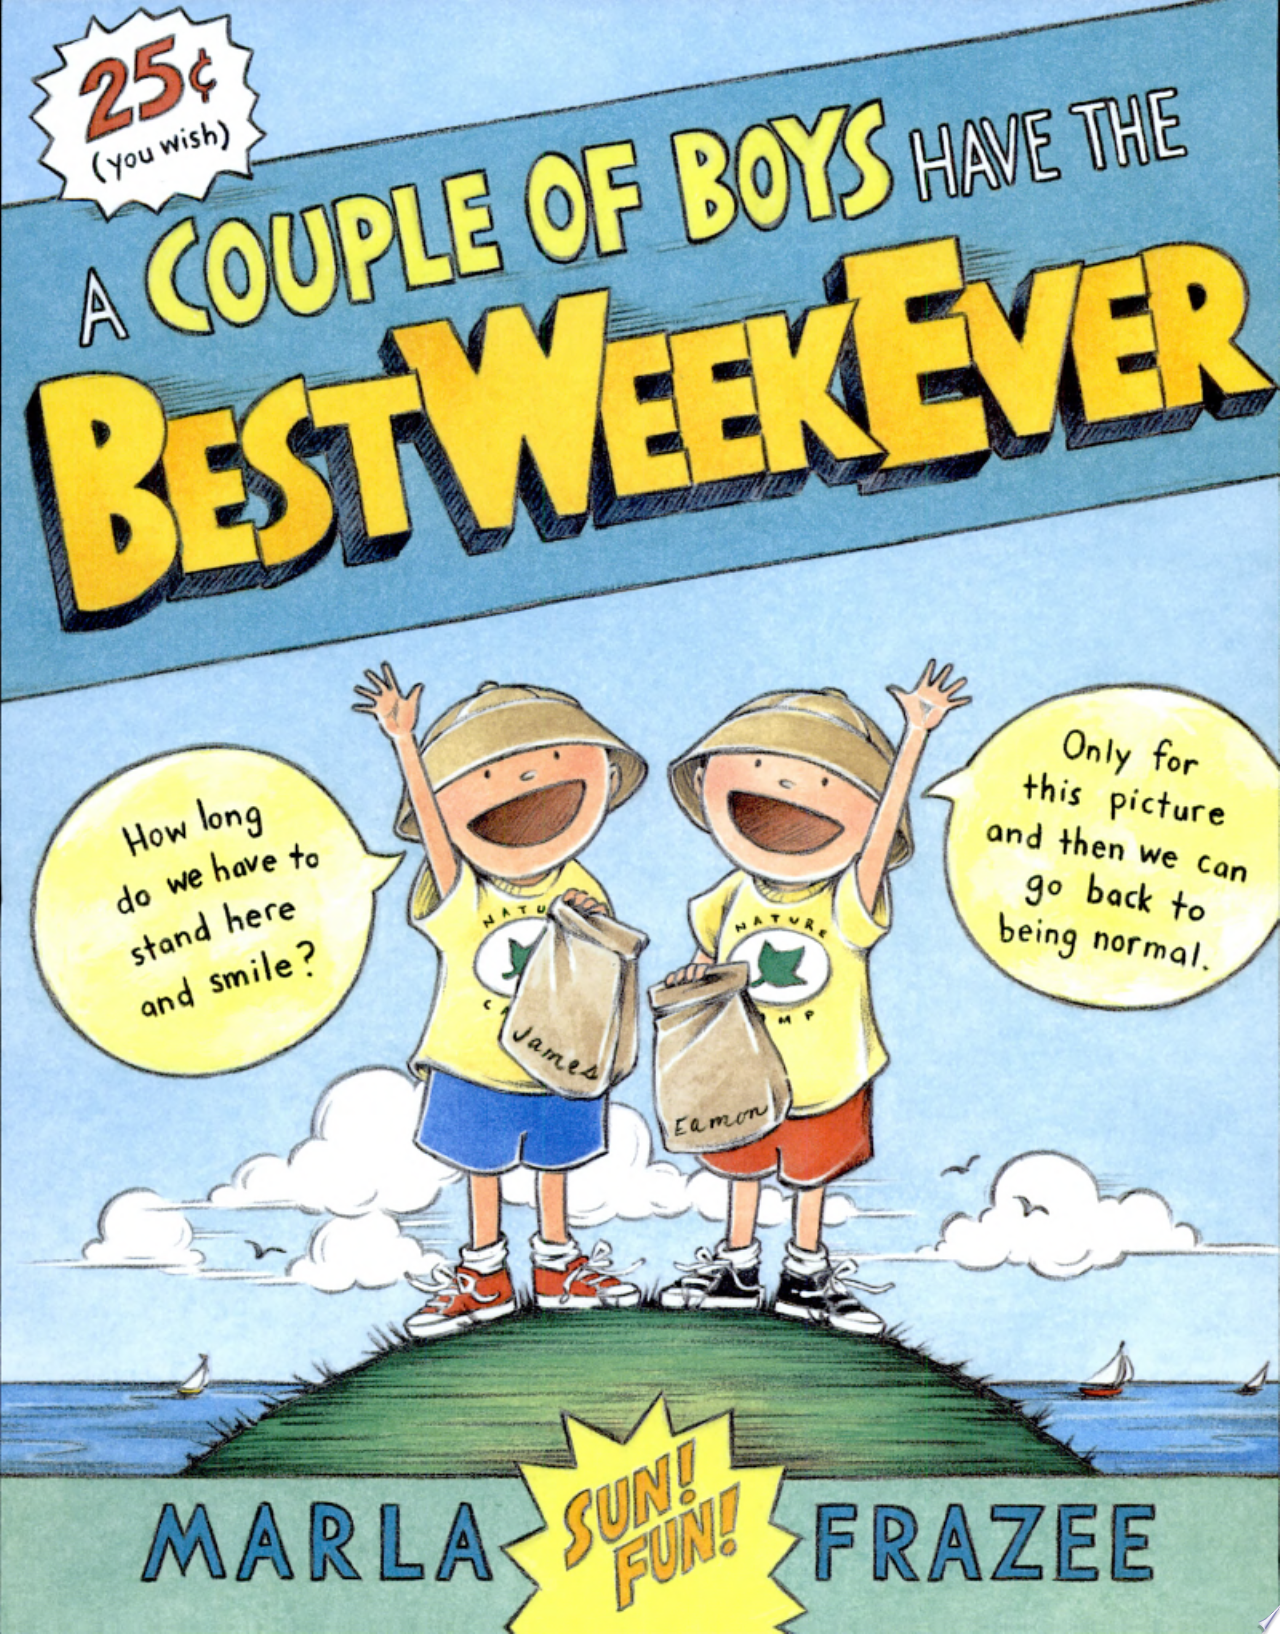 Image for "A Couple of Boys Have the Best Week Ever"